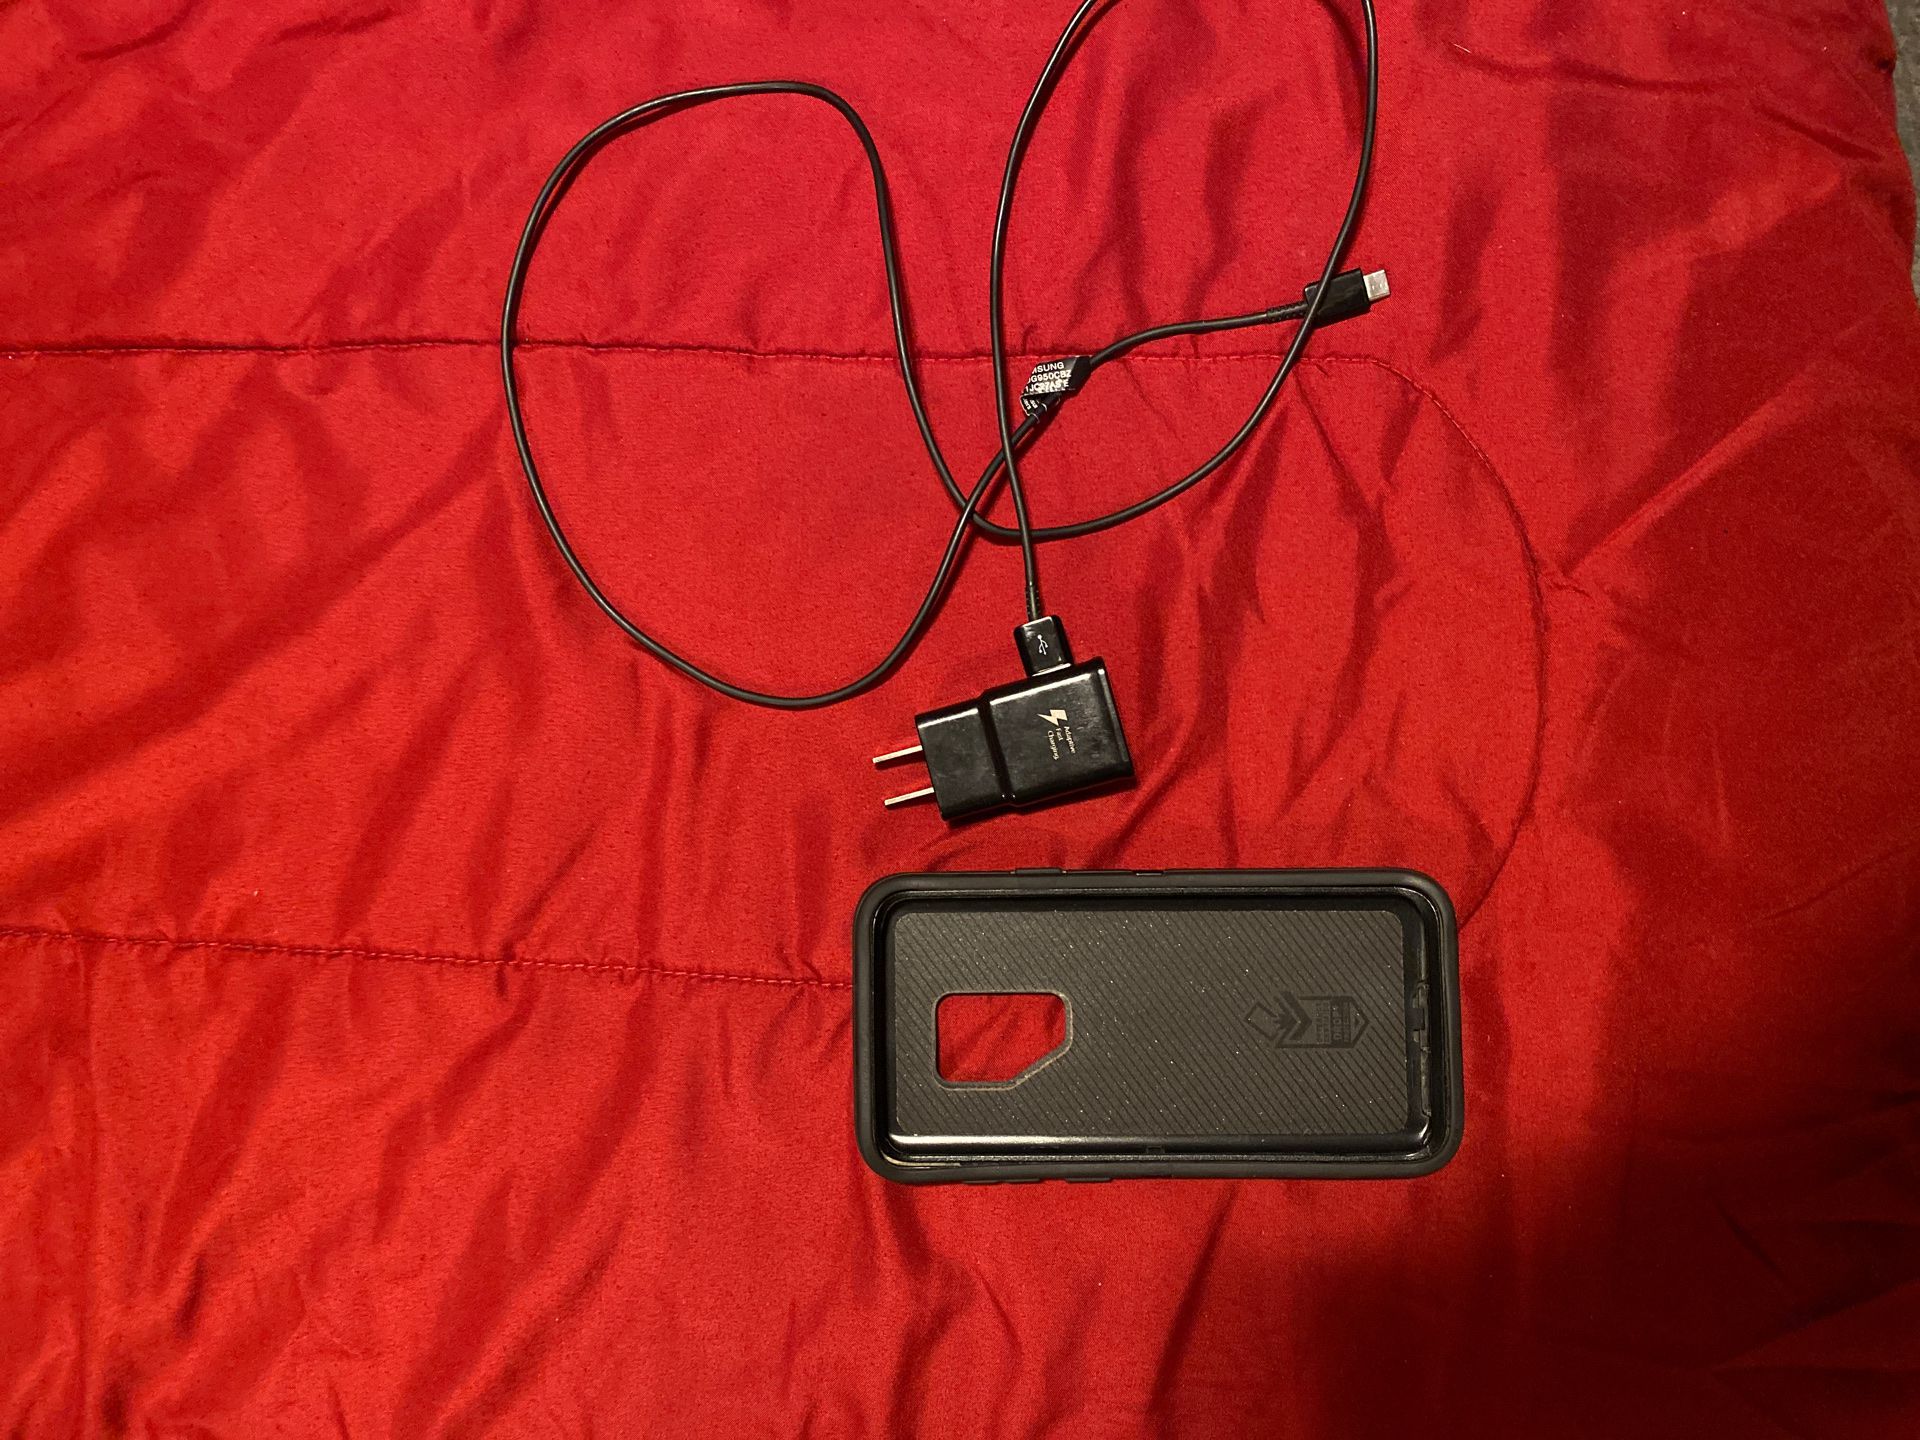 Samsung s9+ charger and otterbox case